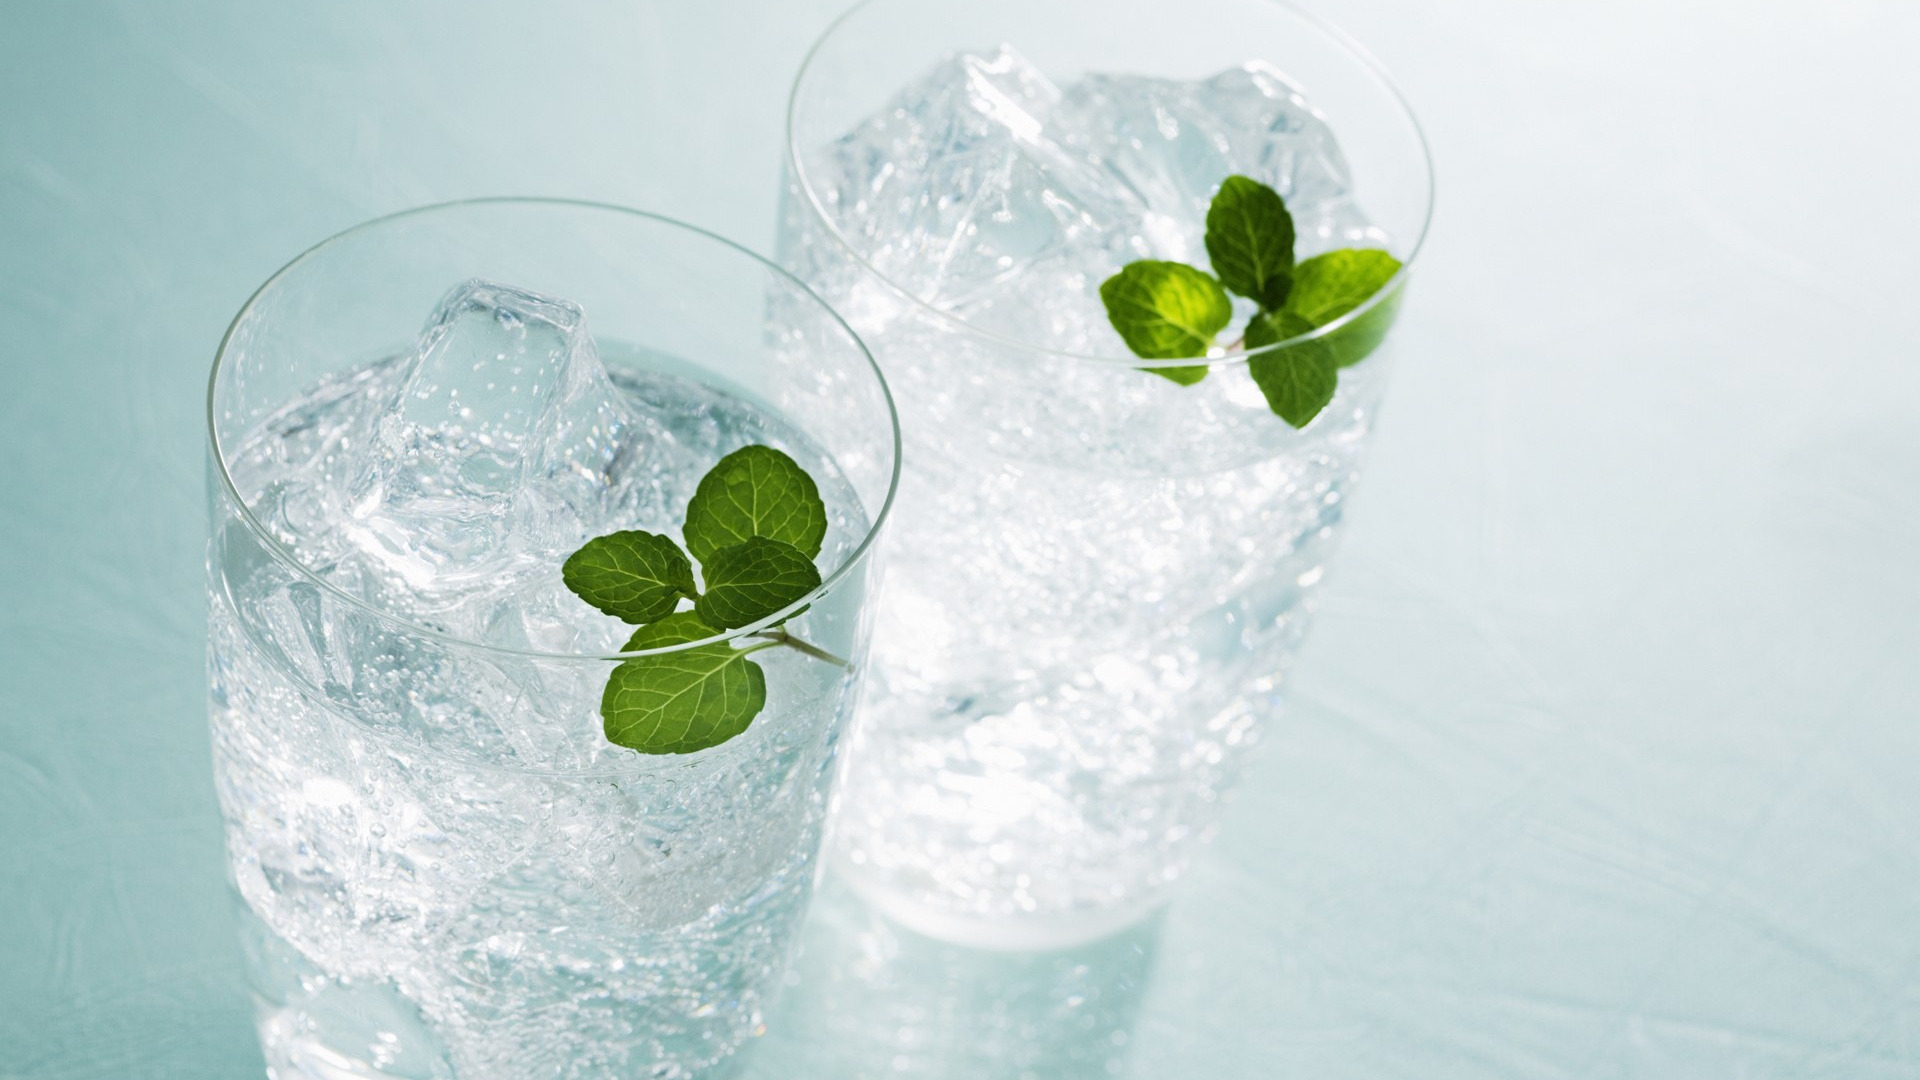 Glass of Carbonated Water for 1920 x 1080 HDTV 1080p resolution